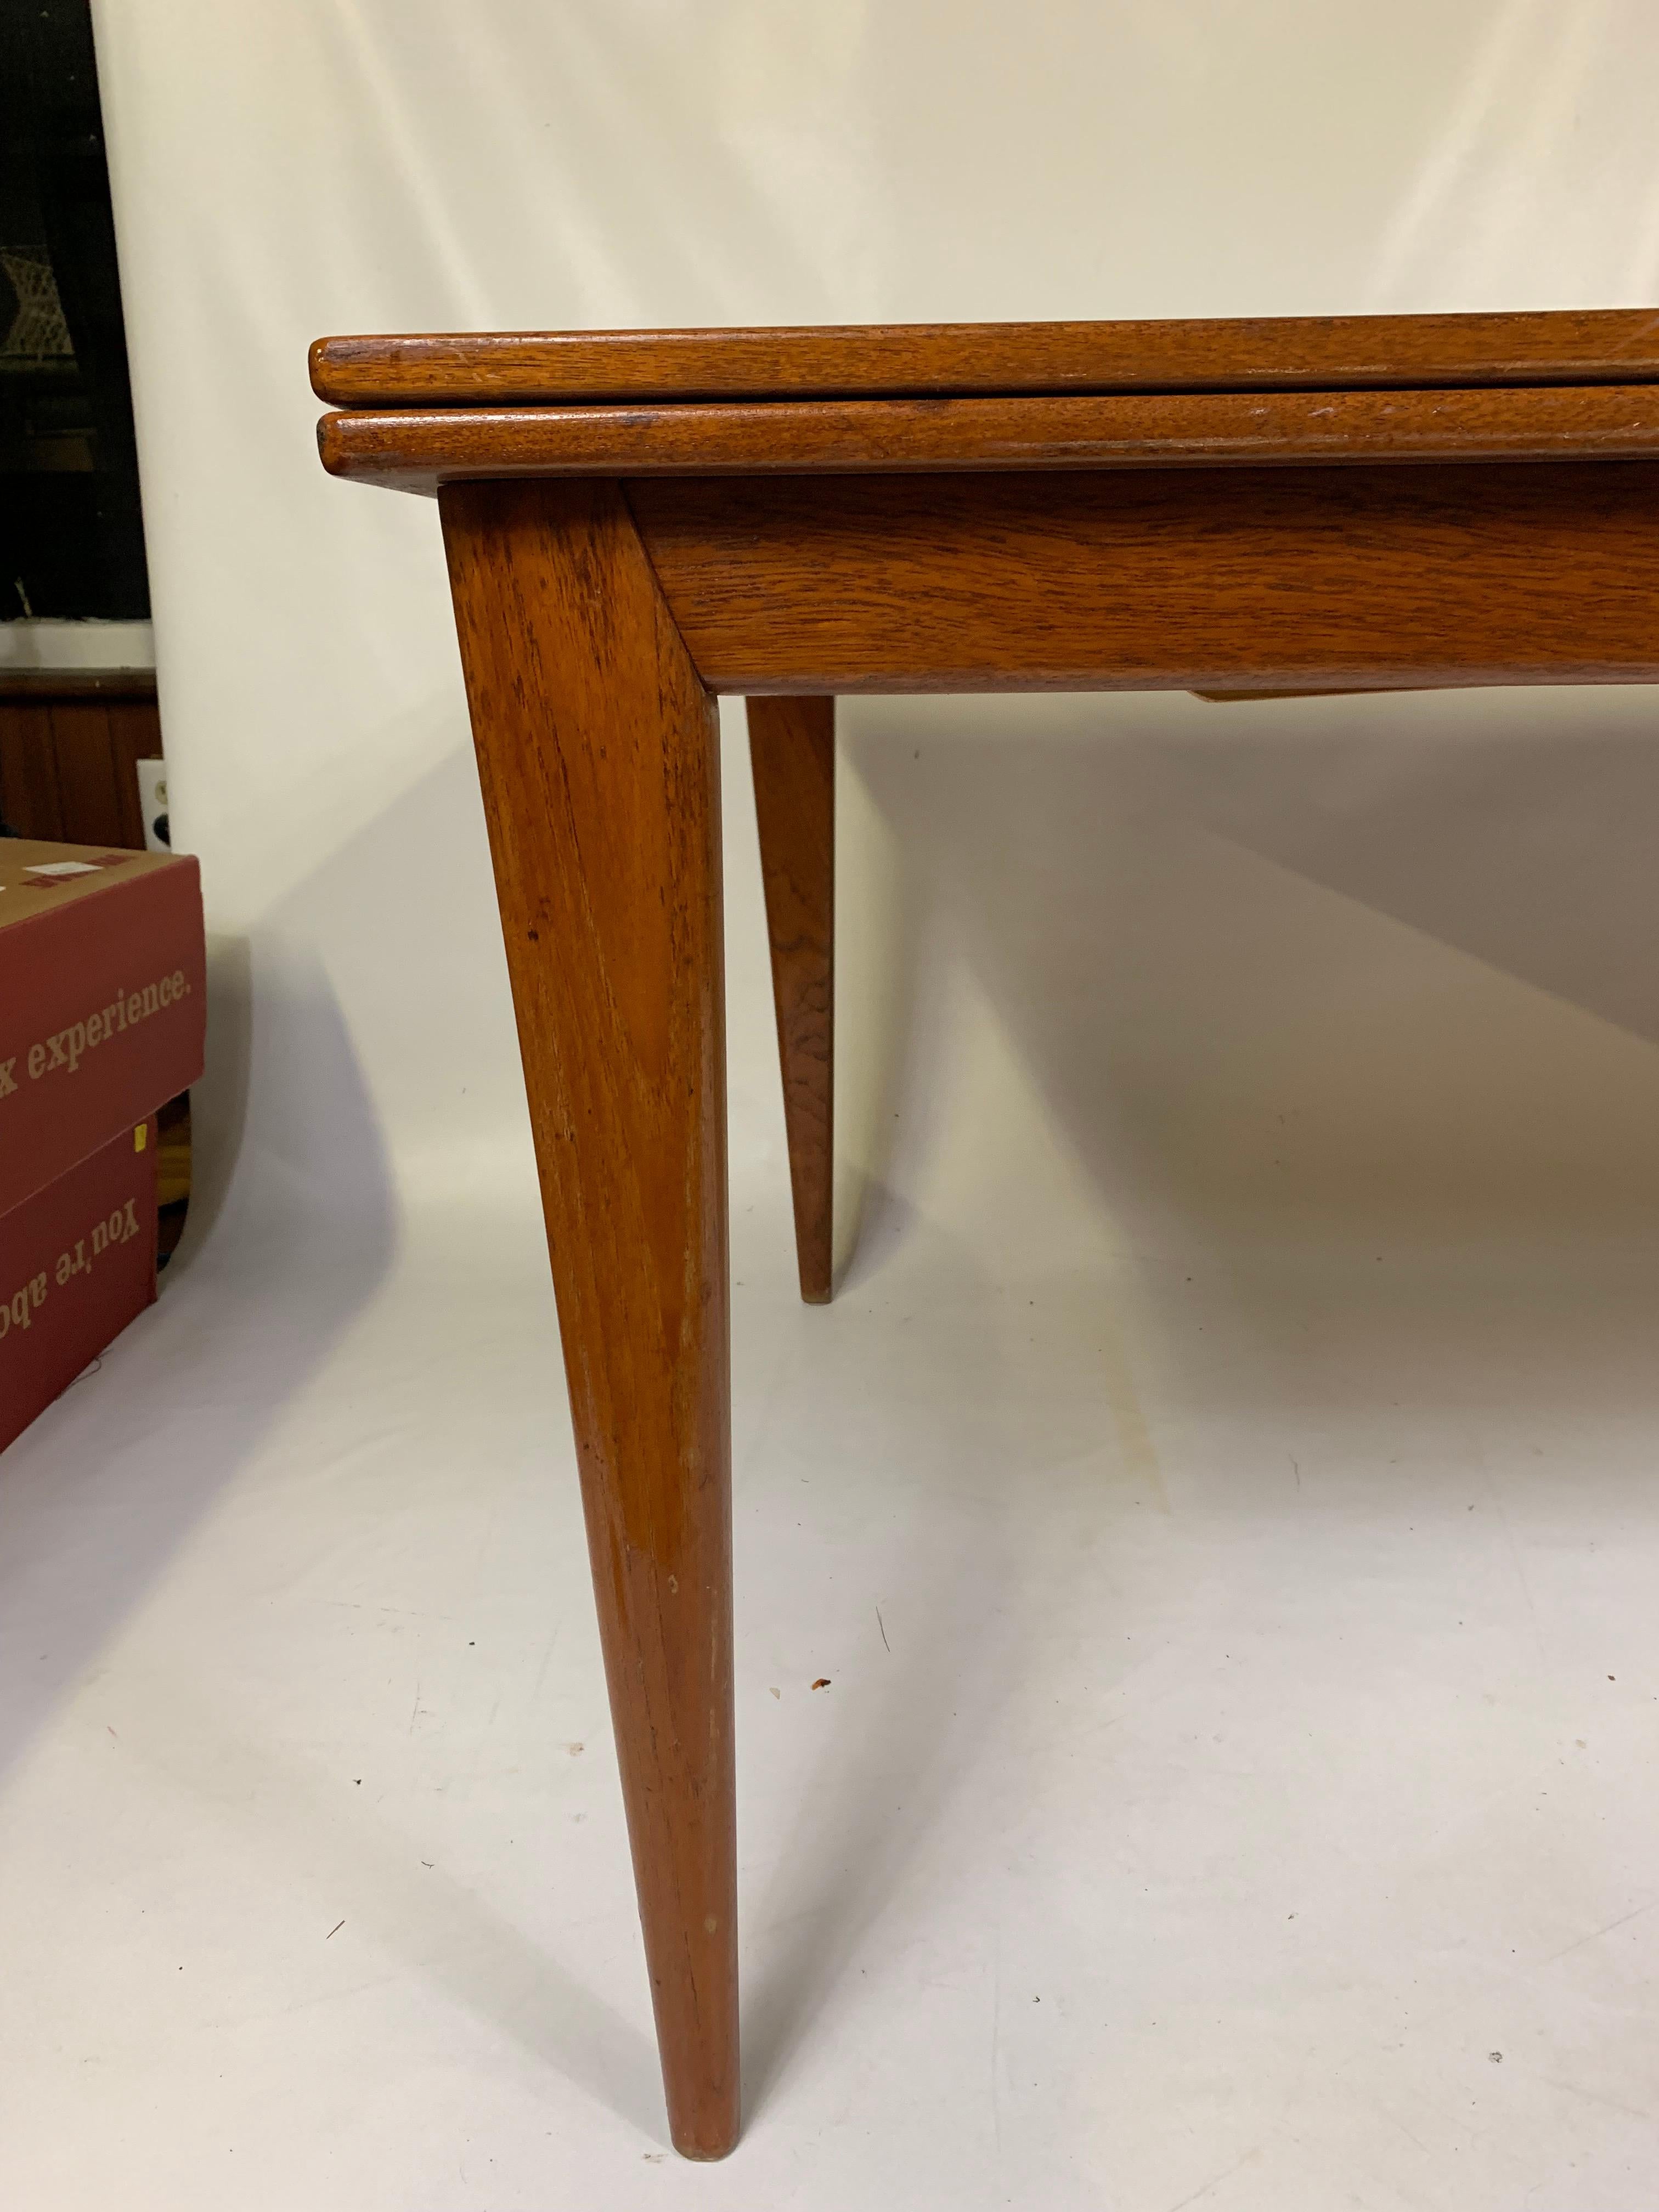 Great midcentury Danish table. The table can be used as a dining table or conference table. Table not extended it is 70.75”.